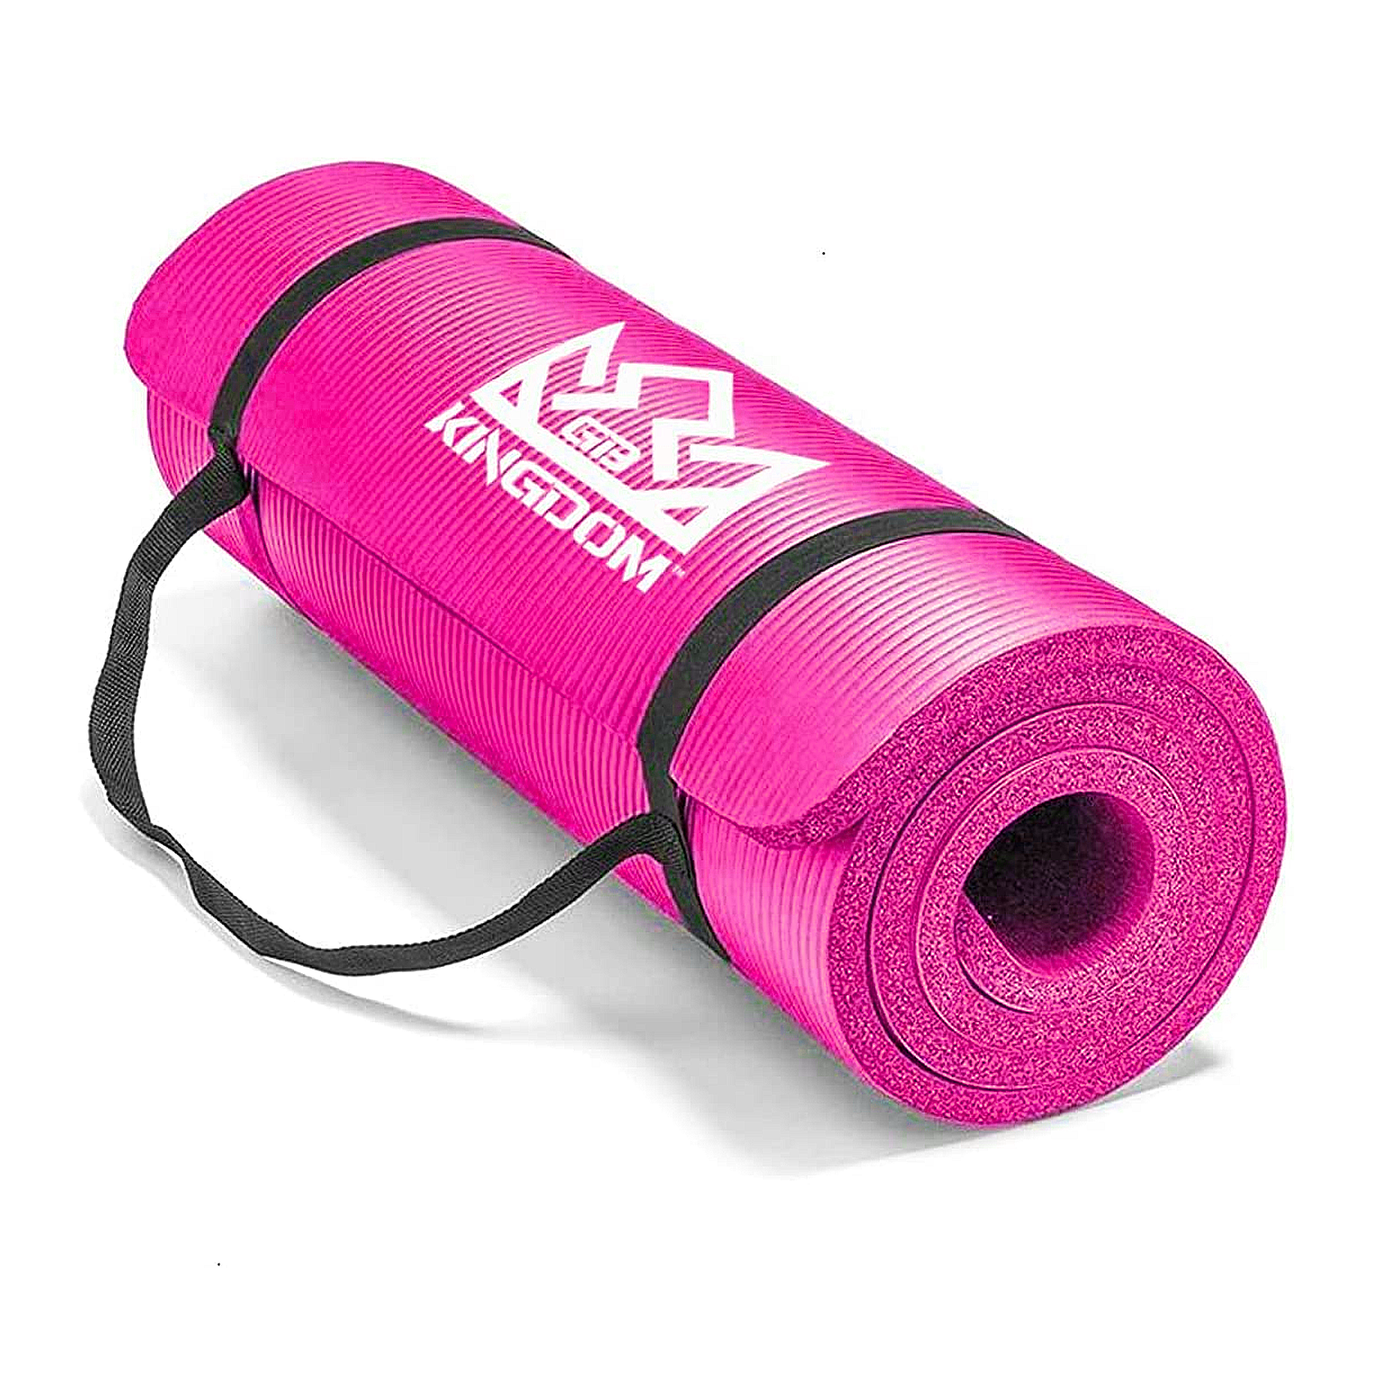 Extra Thick Yoga Mat- Non Slip Comfort Foam, Durable Exercise Mat For  Fitness, Pilates and Workout With Carrying Strap By Leisure Sports (Red)